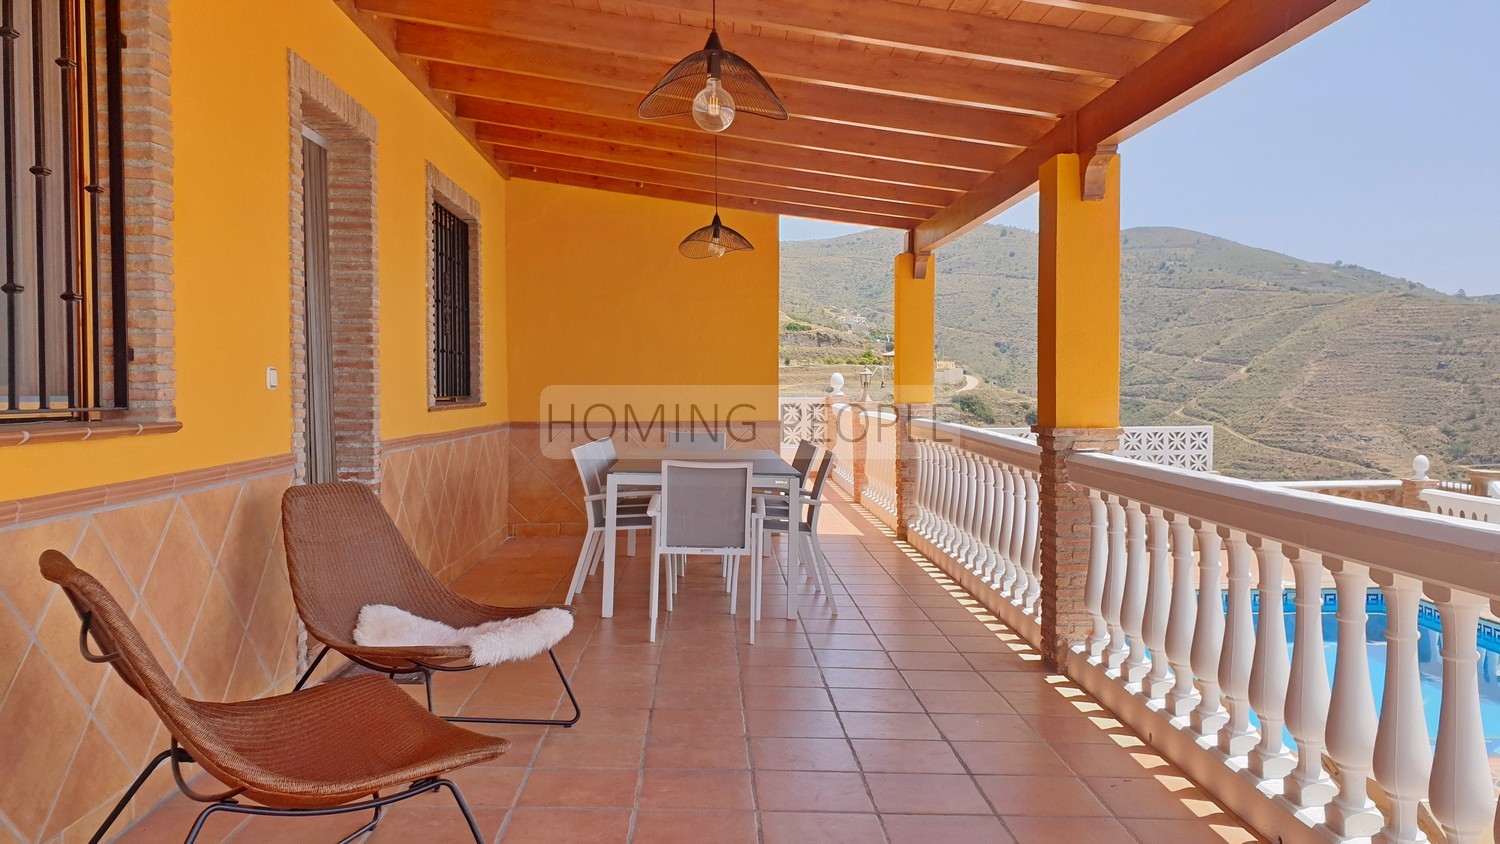 Cortijo-type villa with pool... only 5 minutes from the motorway with breathtaking sea views!